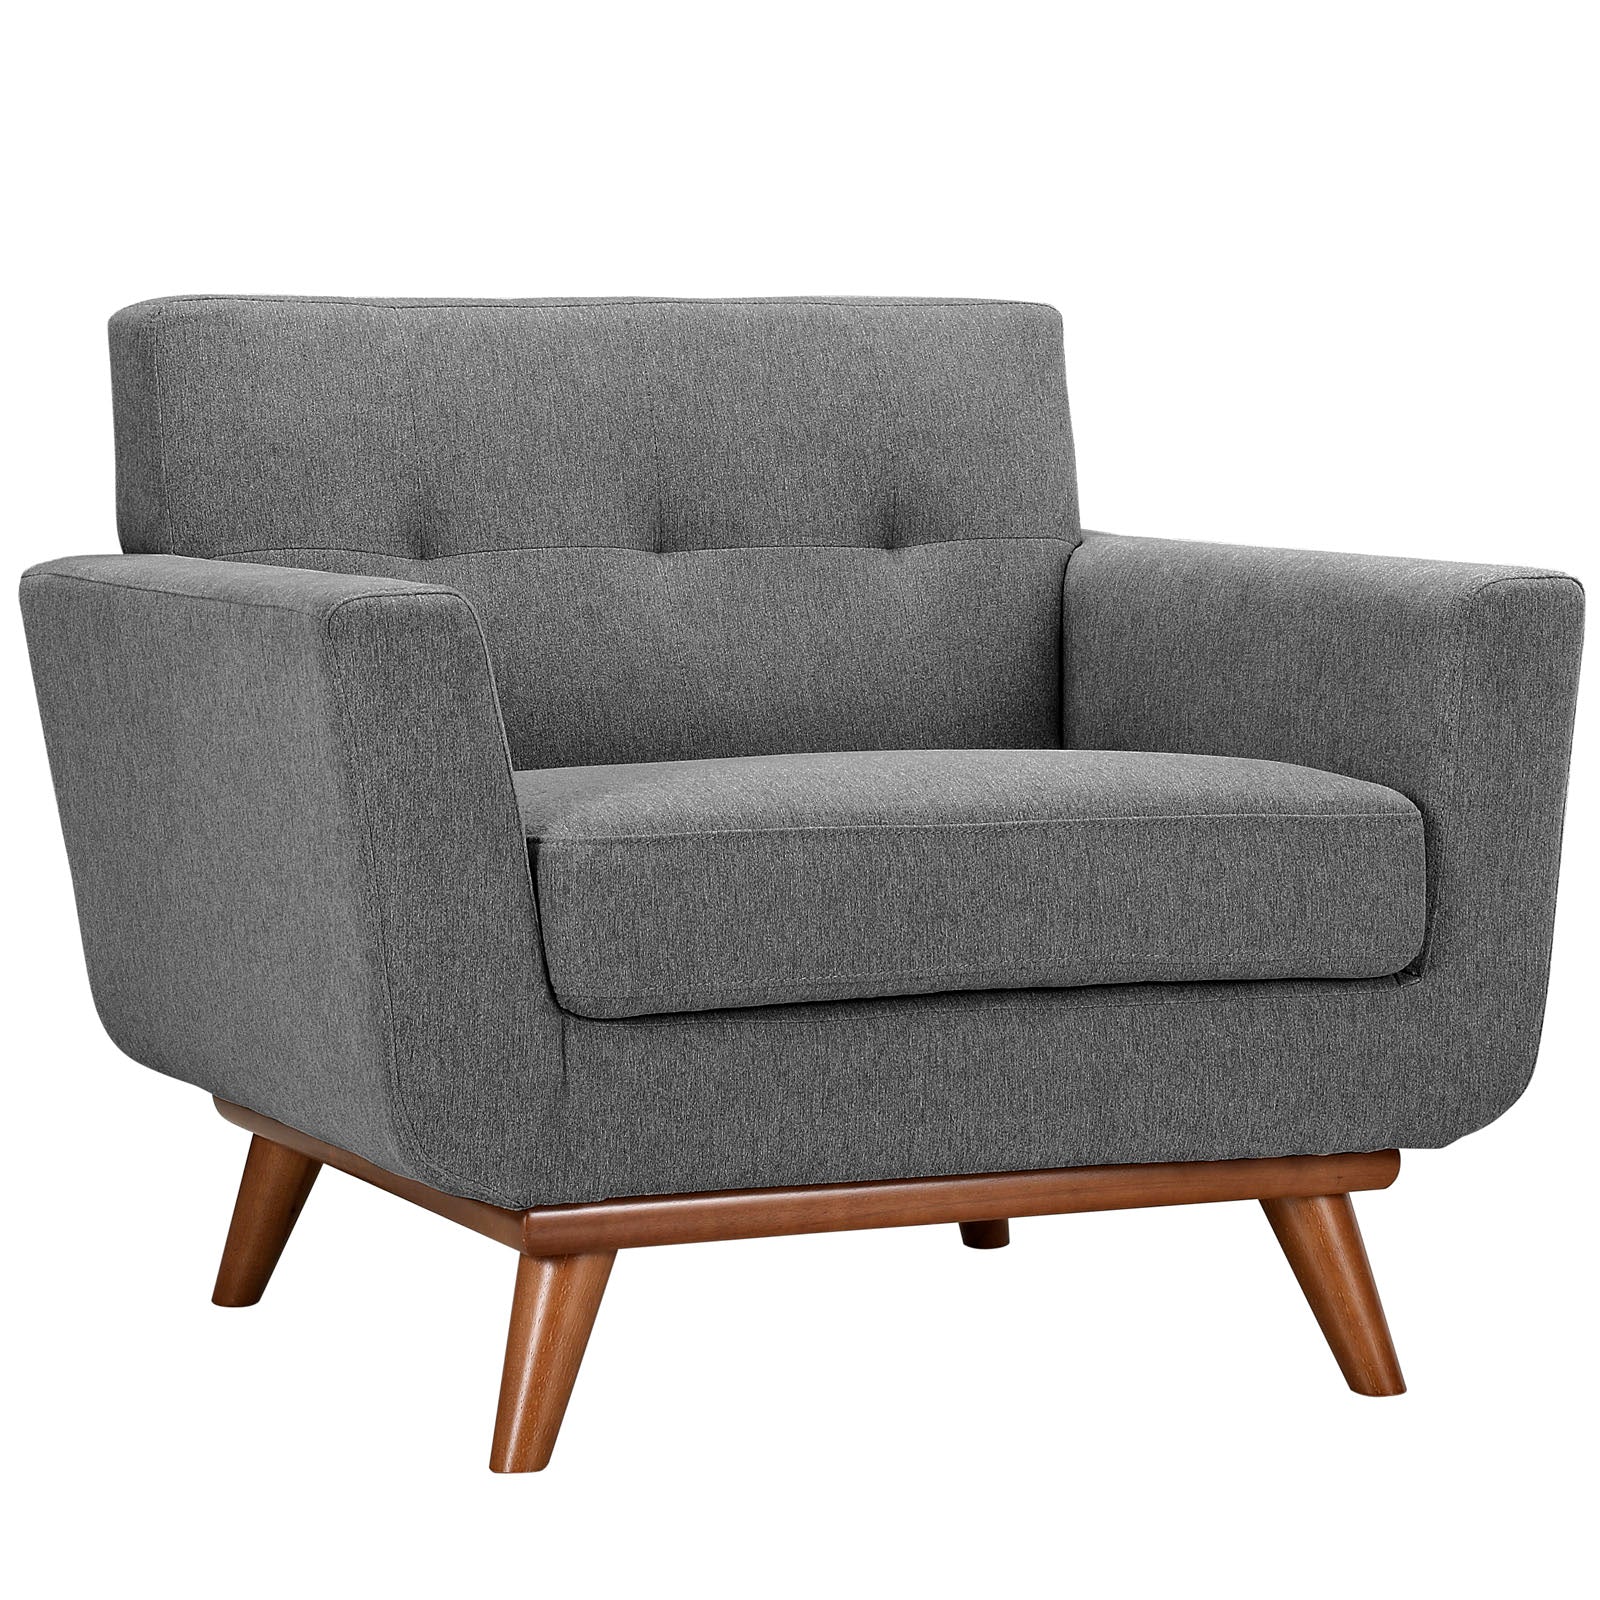 Modway Living Room Sets - Engage Armchairs and Loveseat Set of 3 Expectation Gray